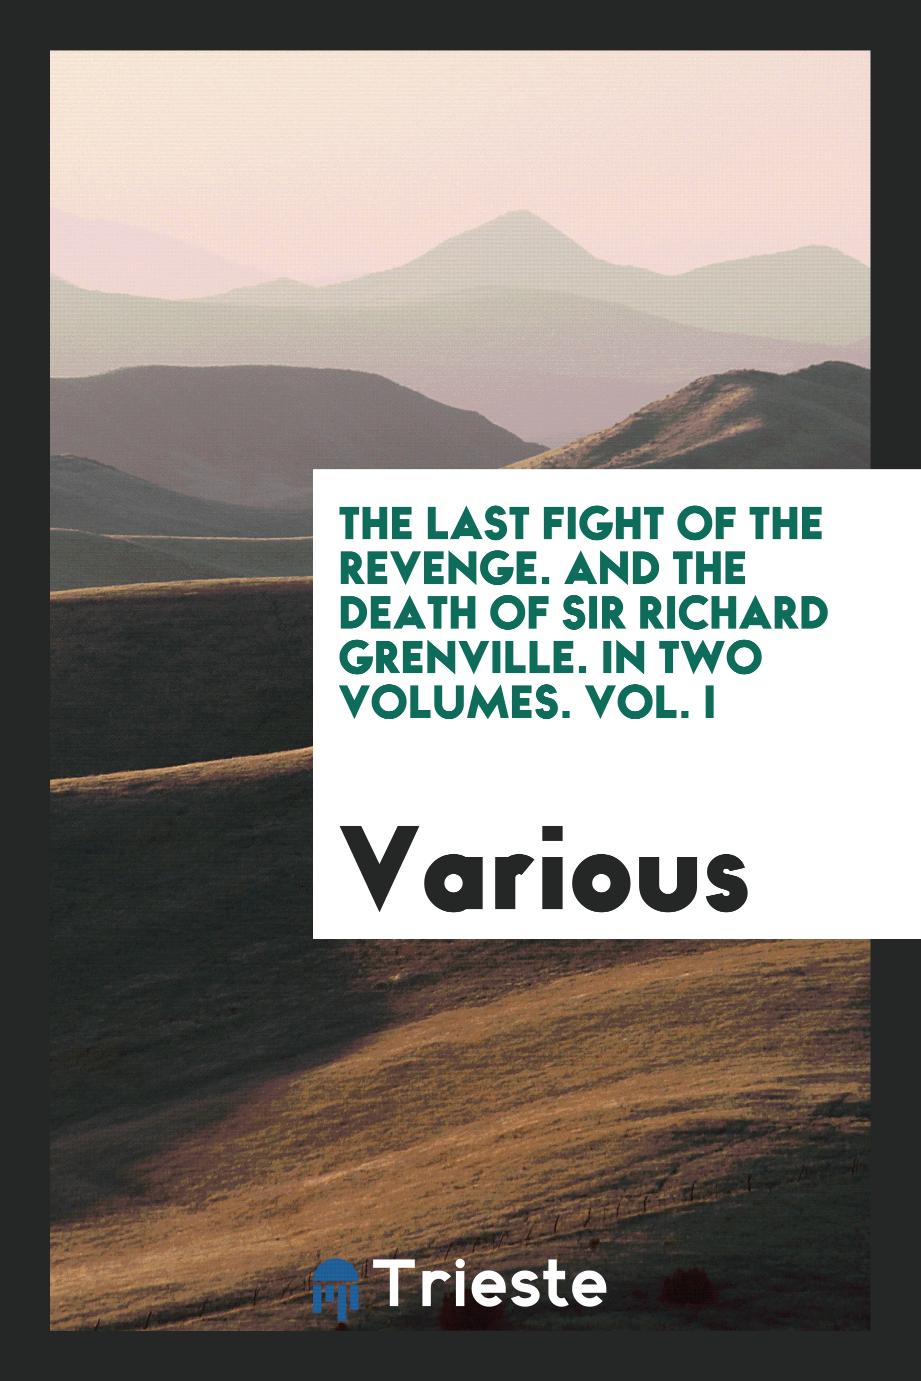 The Last Fight of the Revenge. And the Death of Sir Richard Grenville. In Two Volumes. Vol. I